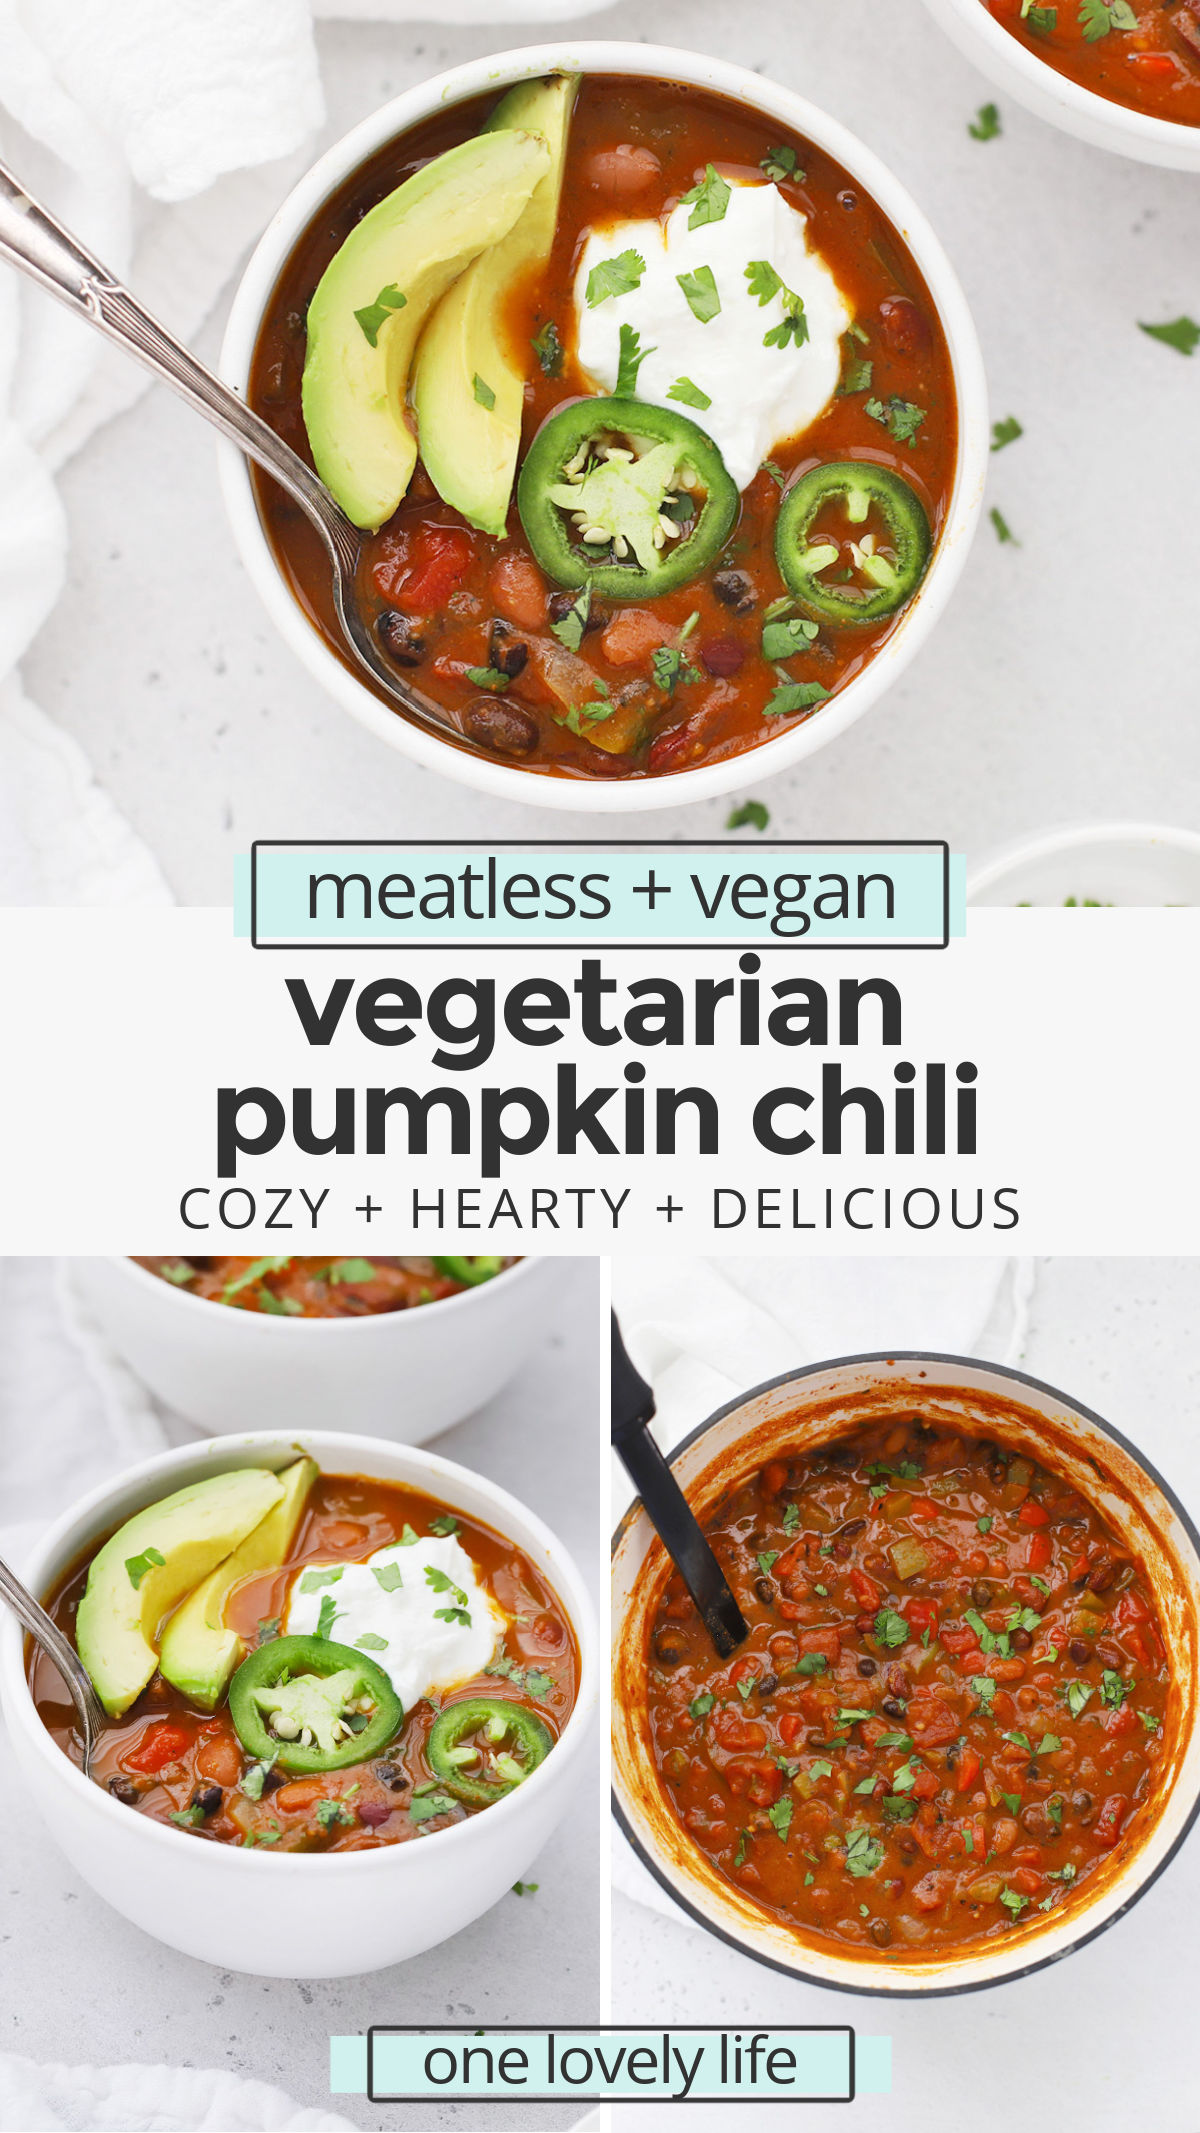 Vegetarian Pumpkin Chili - This cozy vegetarian chili recipe is perfect for cold weather and rainy days. You'll love the flavors! (Gluten-Free, Vegan) // Vegan pumpkin chili recipe // vegan chili recipe // vegetarian dinner // vegetarian lunch // healthy lunch // healthy dinner // chili cookoff recipe #chili #pumpkin #vegetarian #vegan #glutenfree #healthydinner #healthylunch